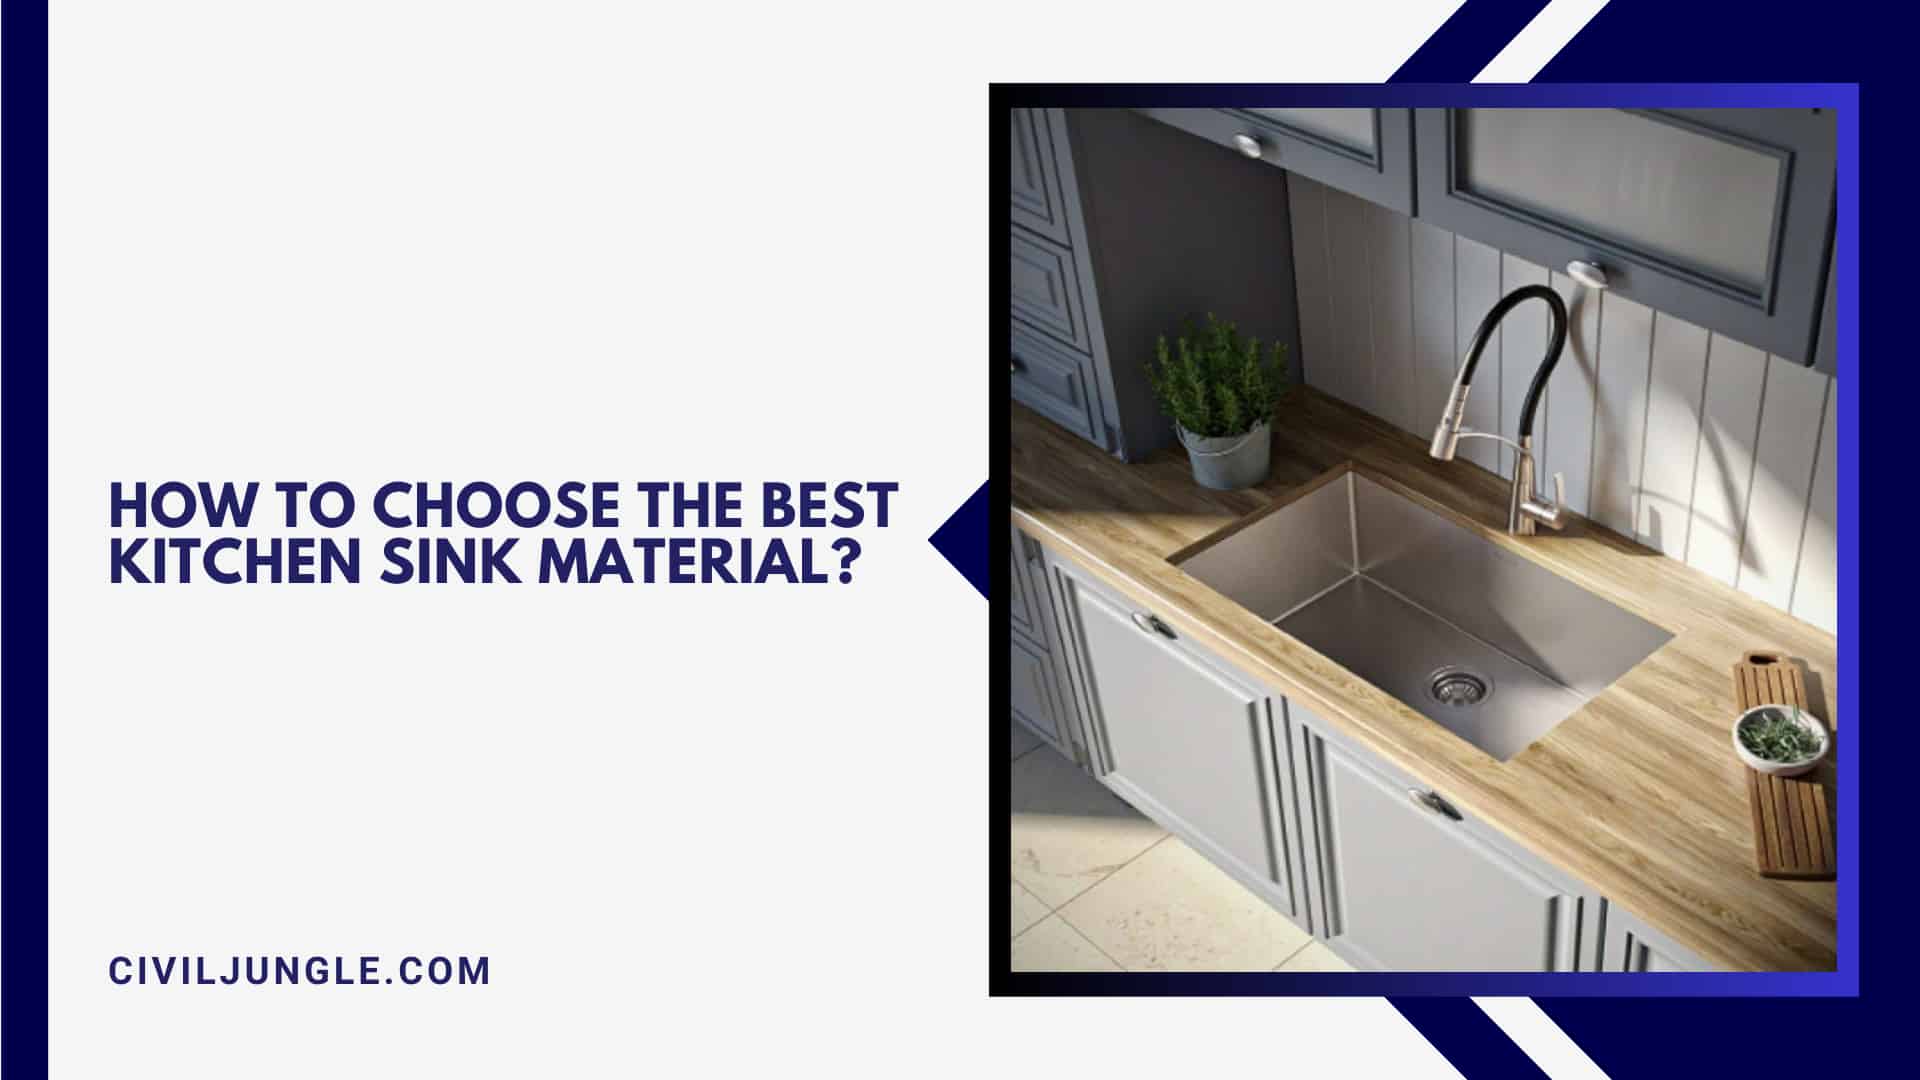 How to Choose the Best Kitchen Sink Material?